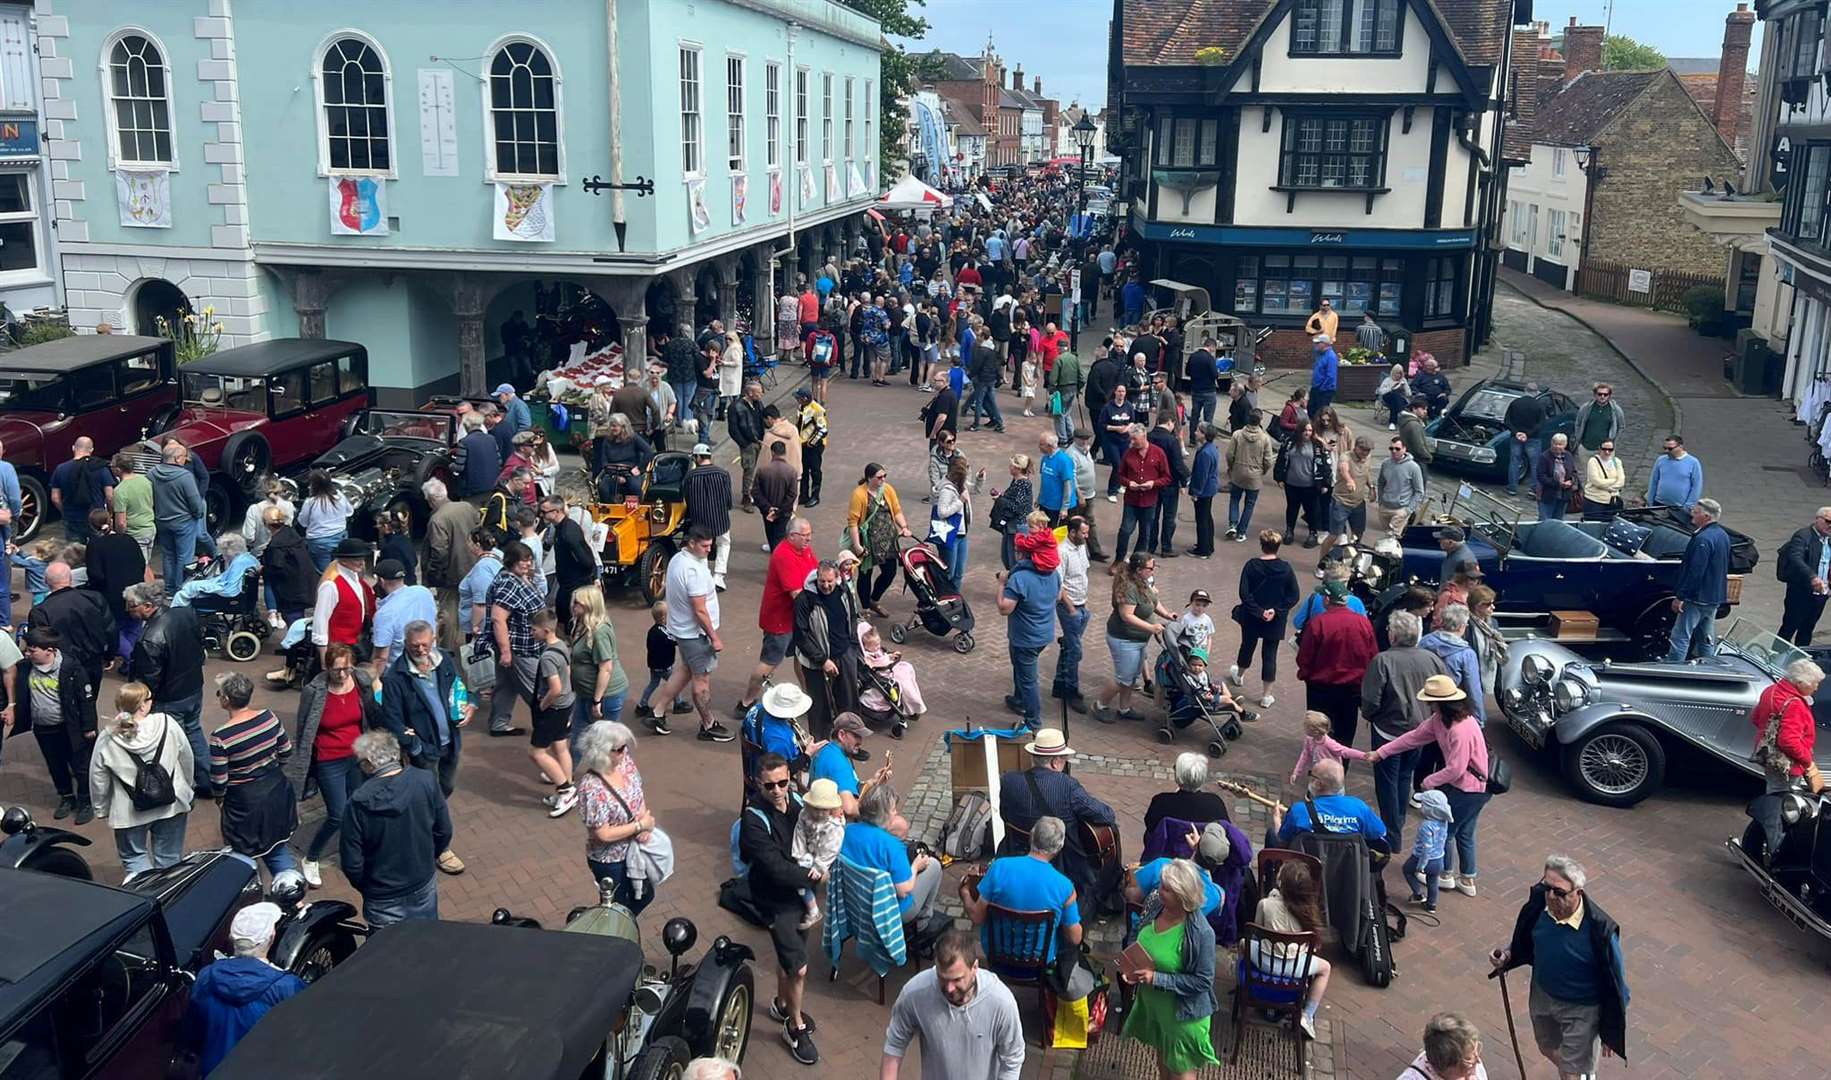 There will also be markets, food stalls and live music over the weekend. Picture: Facebook / Faversham Festival of Transport